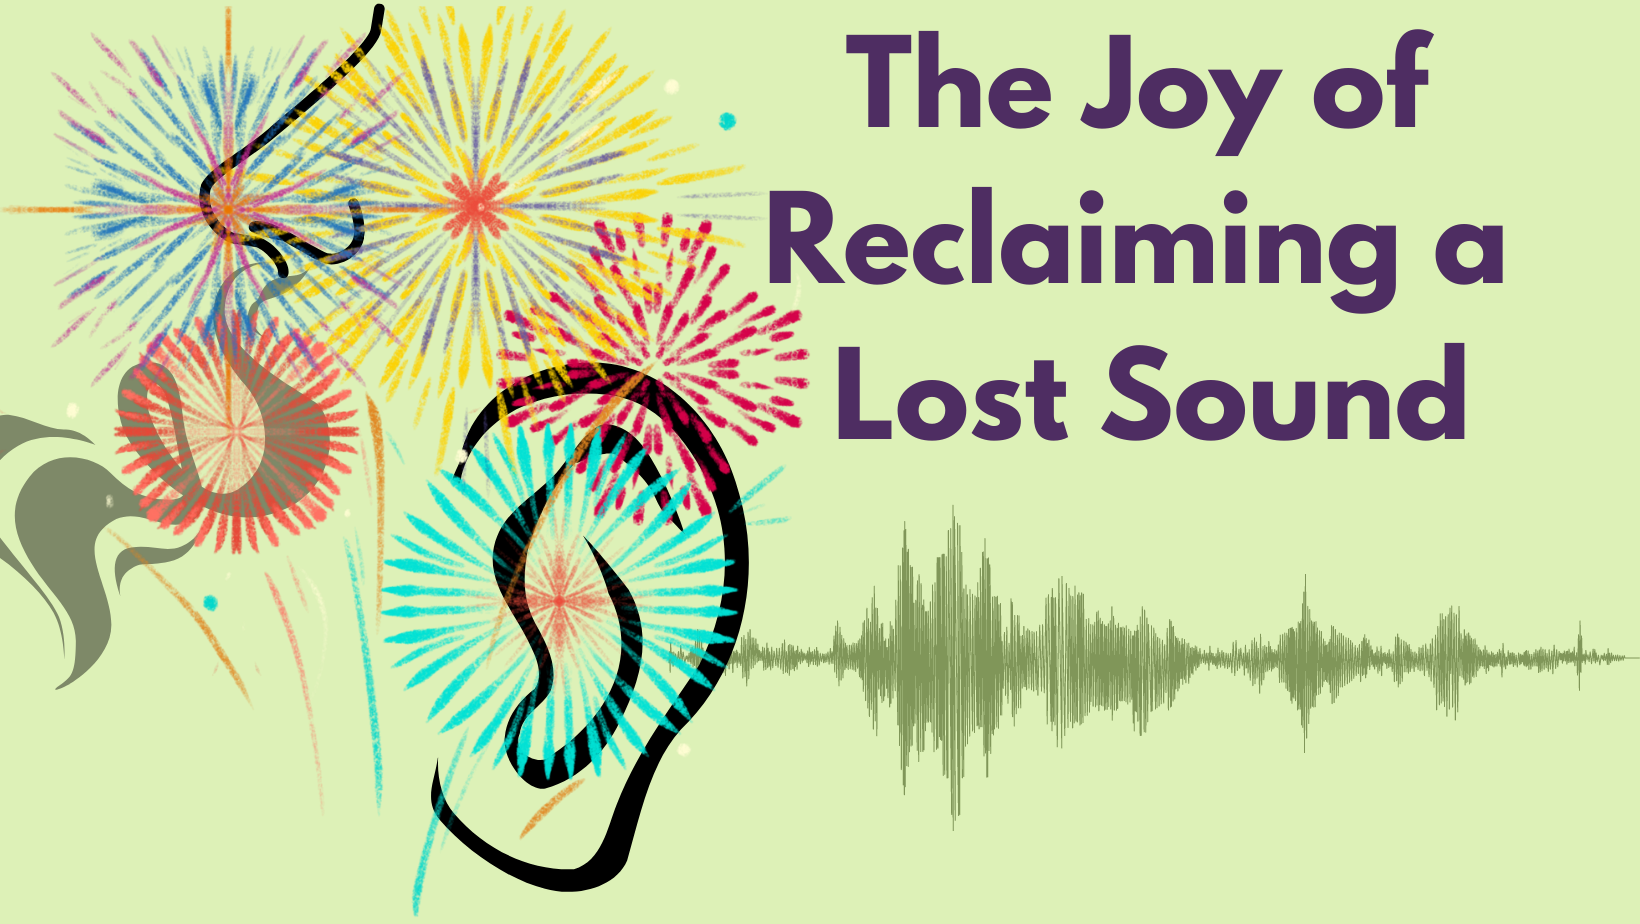 Featured image for “The Joy of Reclaiming a Lost Sound”